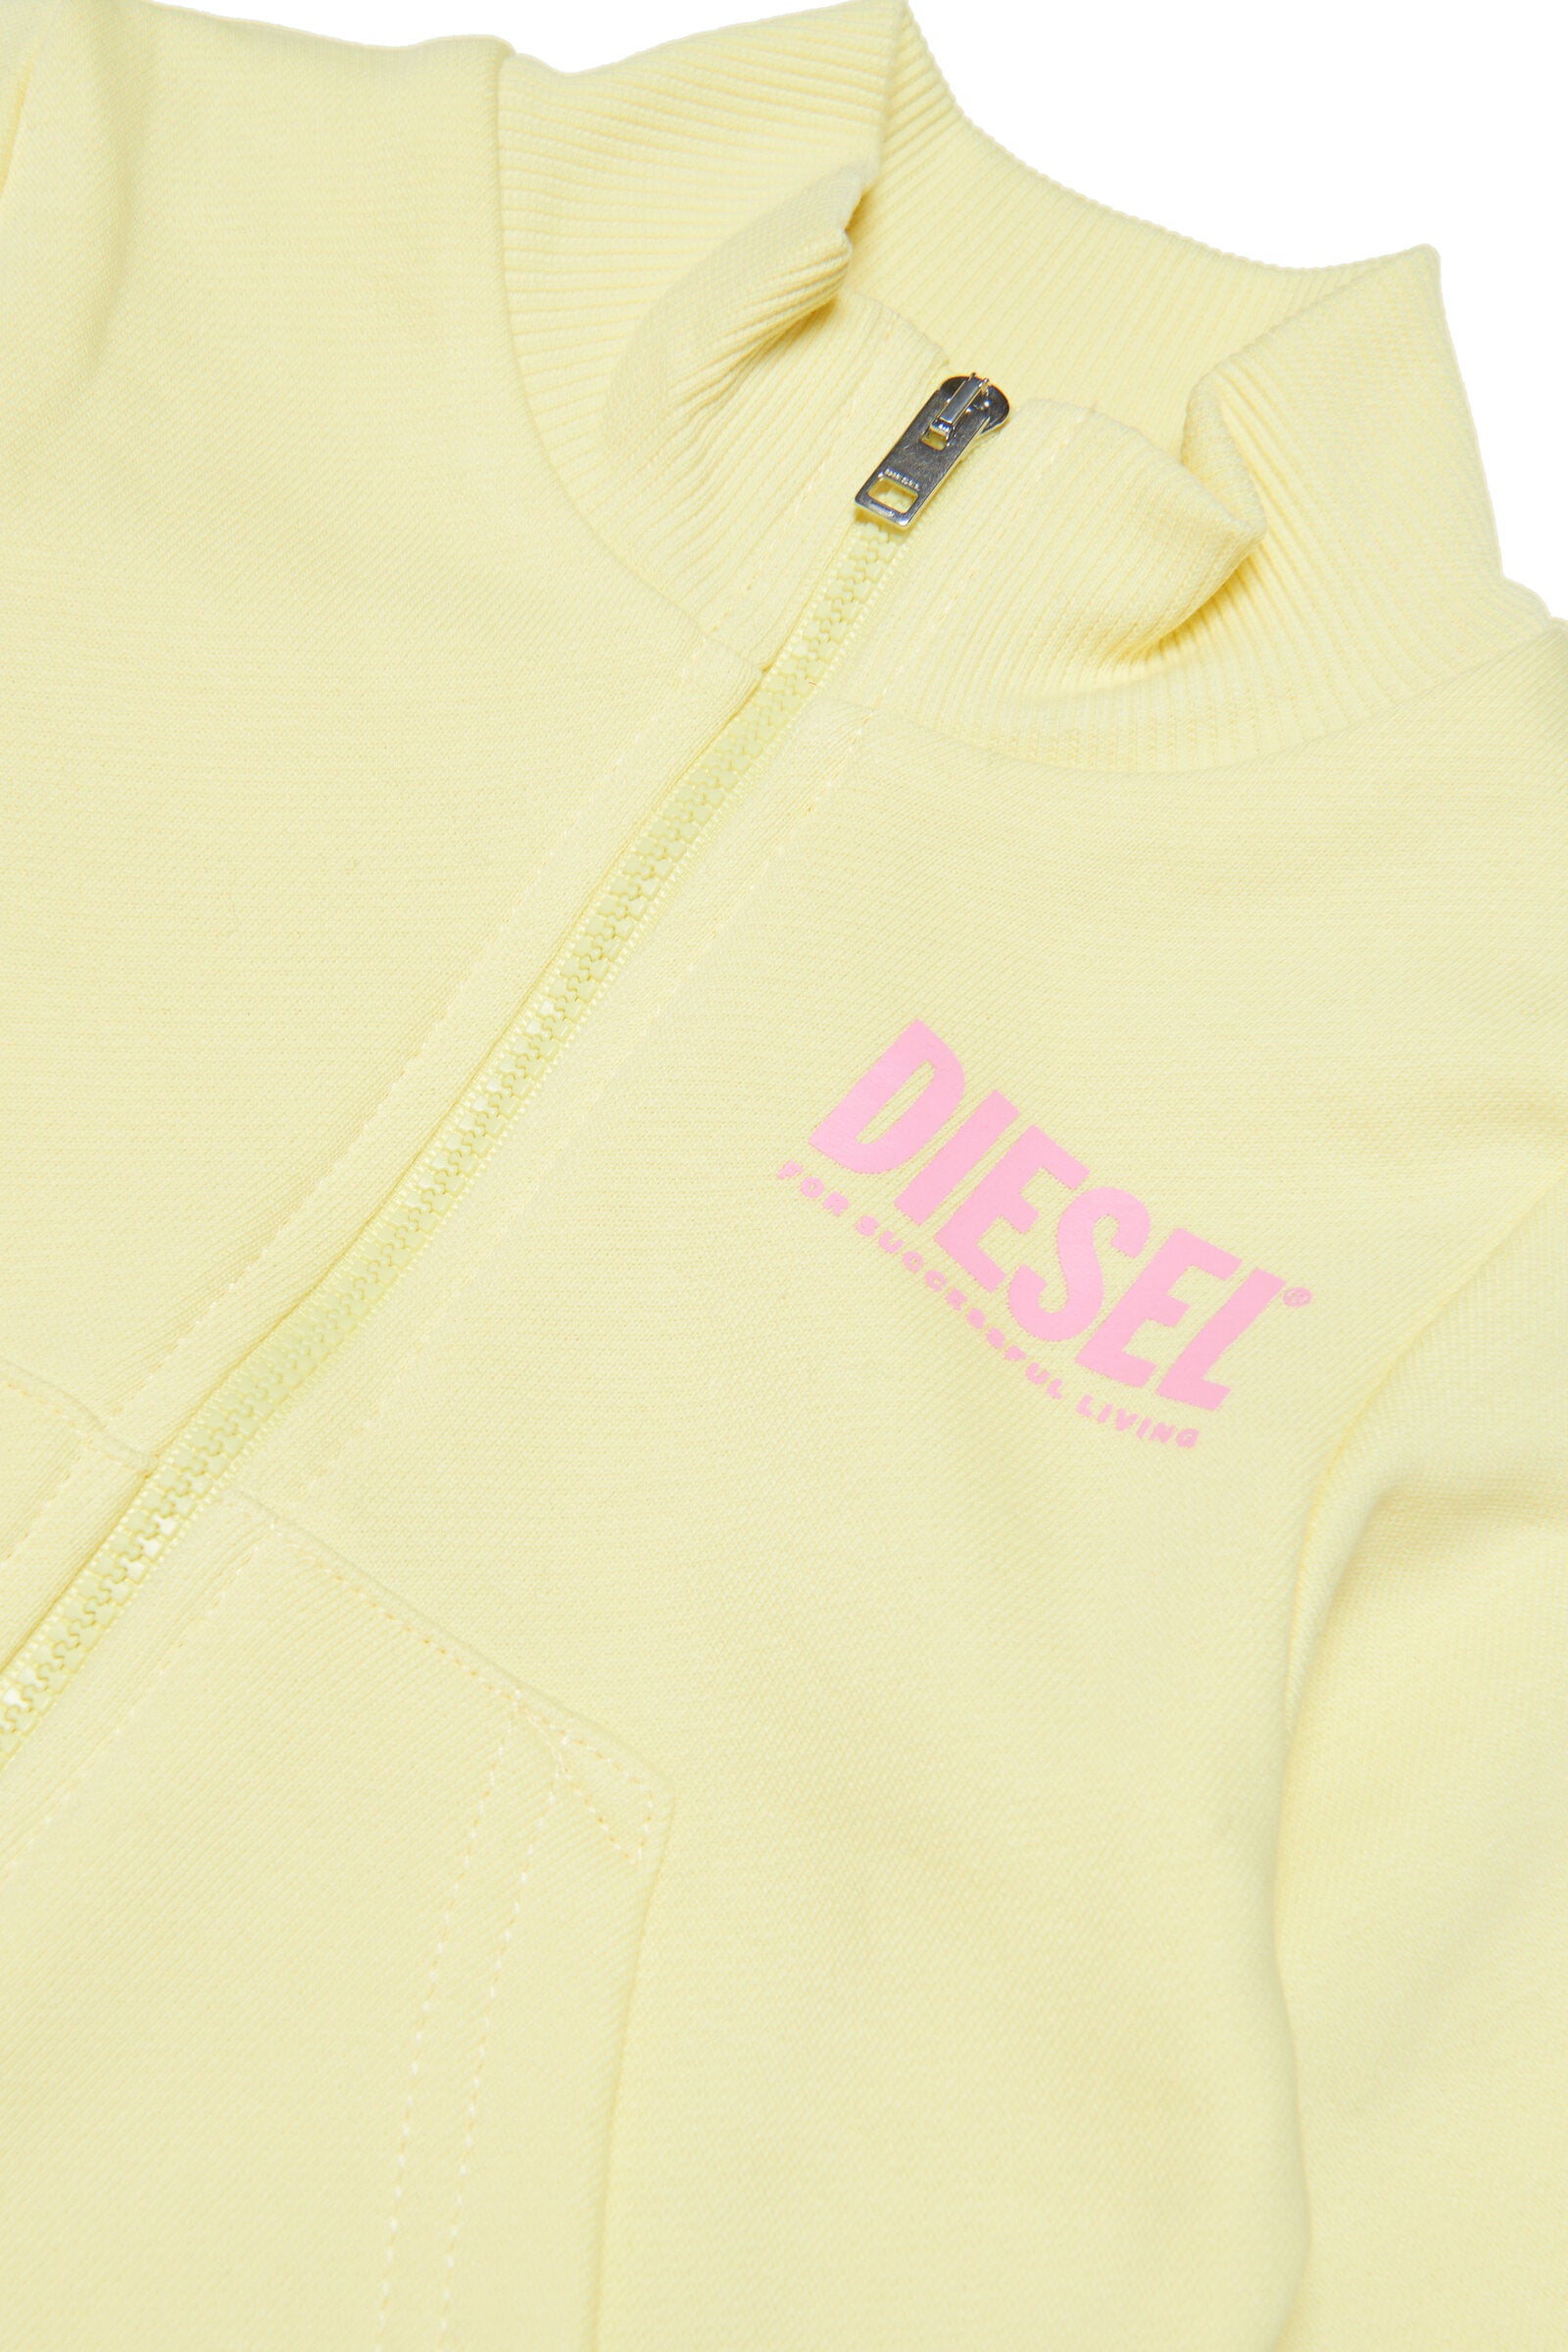 Diesel yellow cotton sweatshirt with zip and extra-large logo for